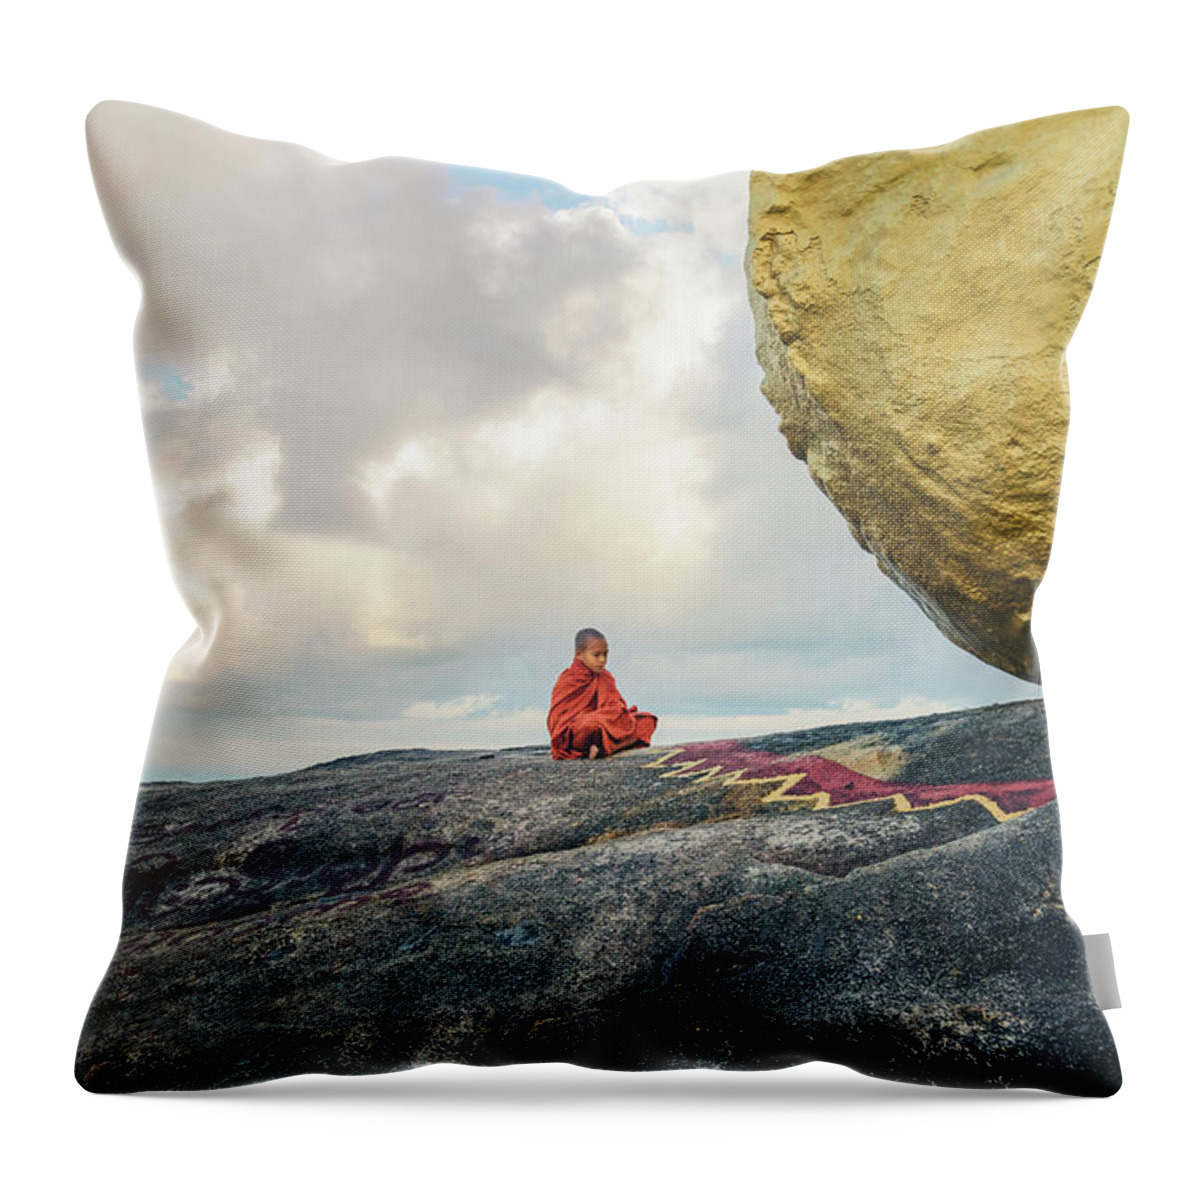 Monk Throw Pillow featuring the photograph Golden Rock - Myanmar #6 by Joana Kruse